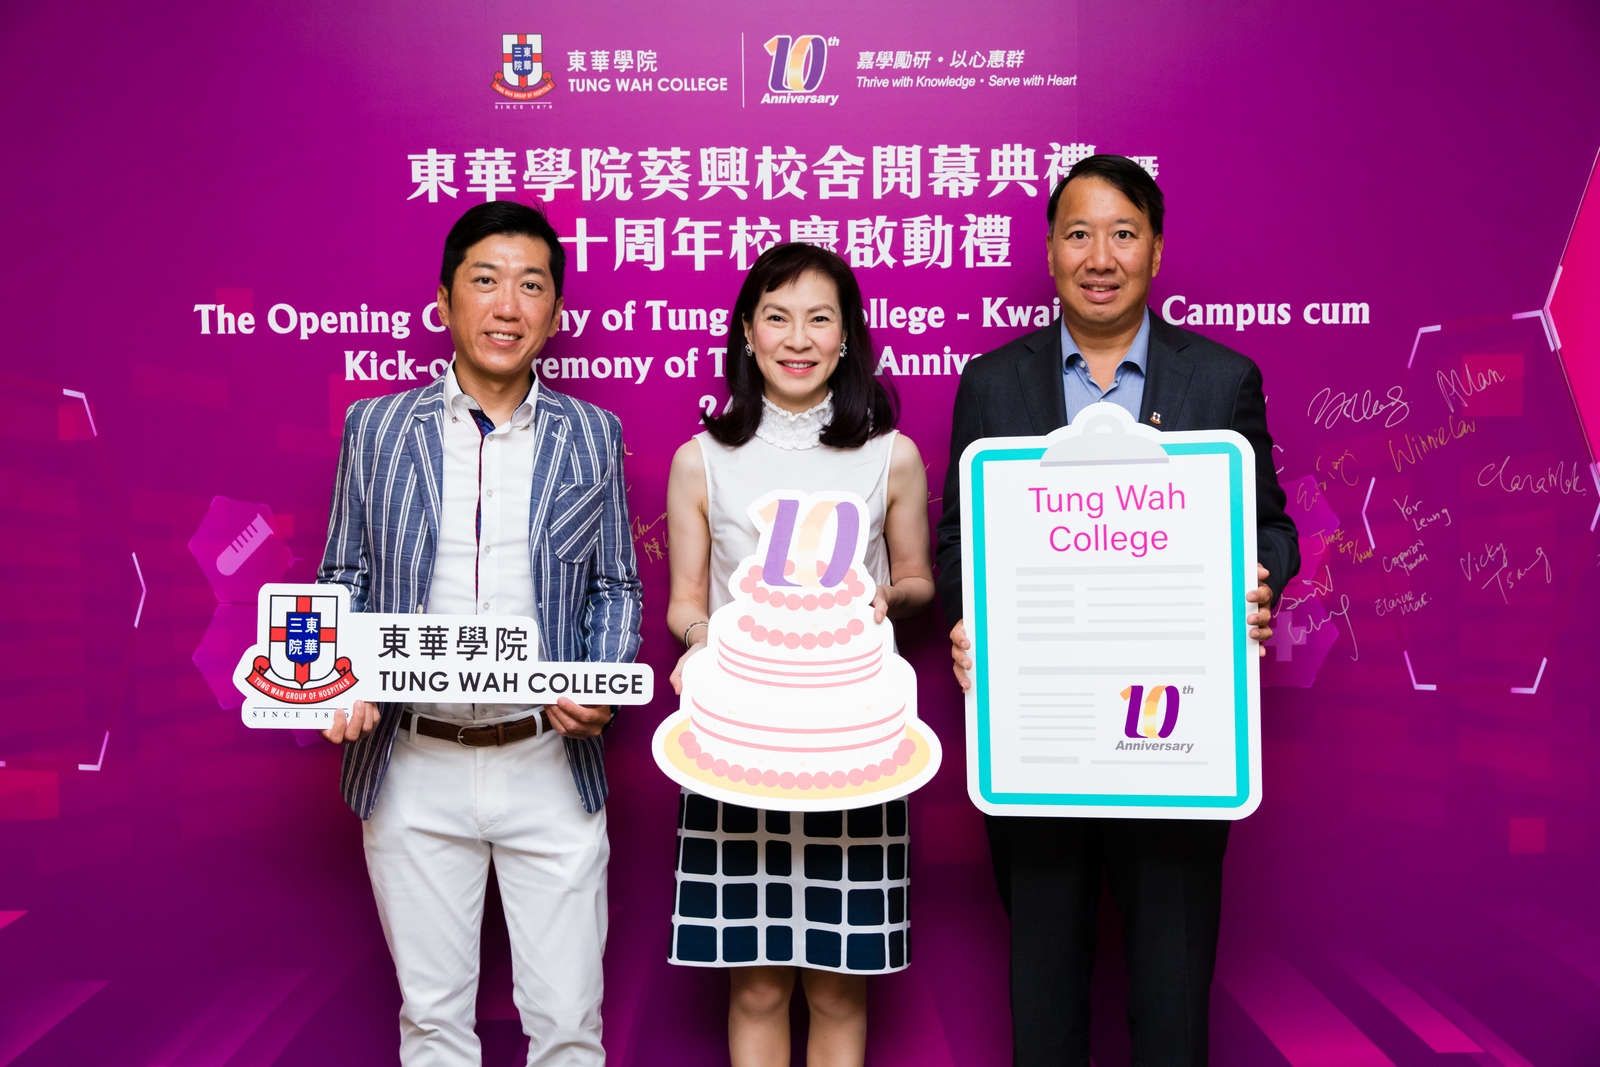 Opening Ceremony of Kwai Hing Campus cum Kick-off Ceremony of 10th Anniversary Activities